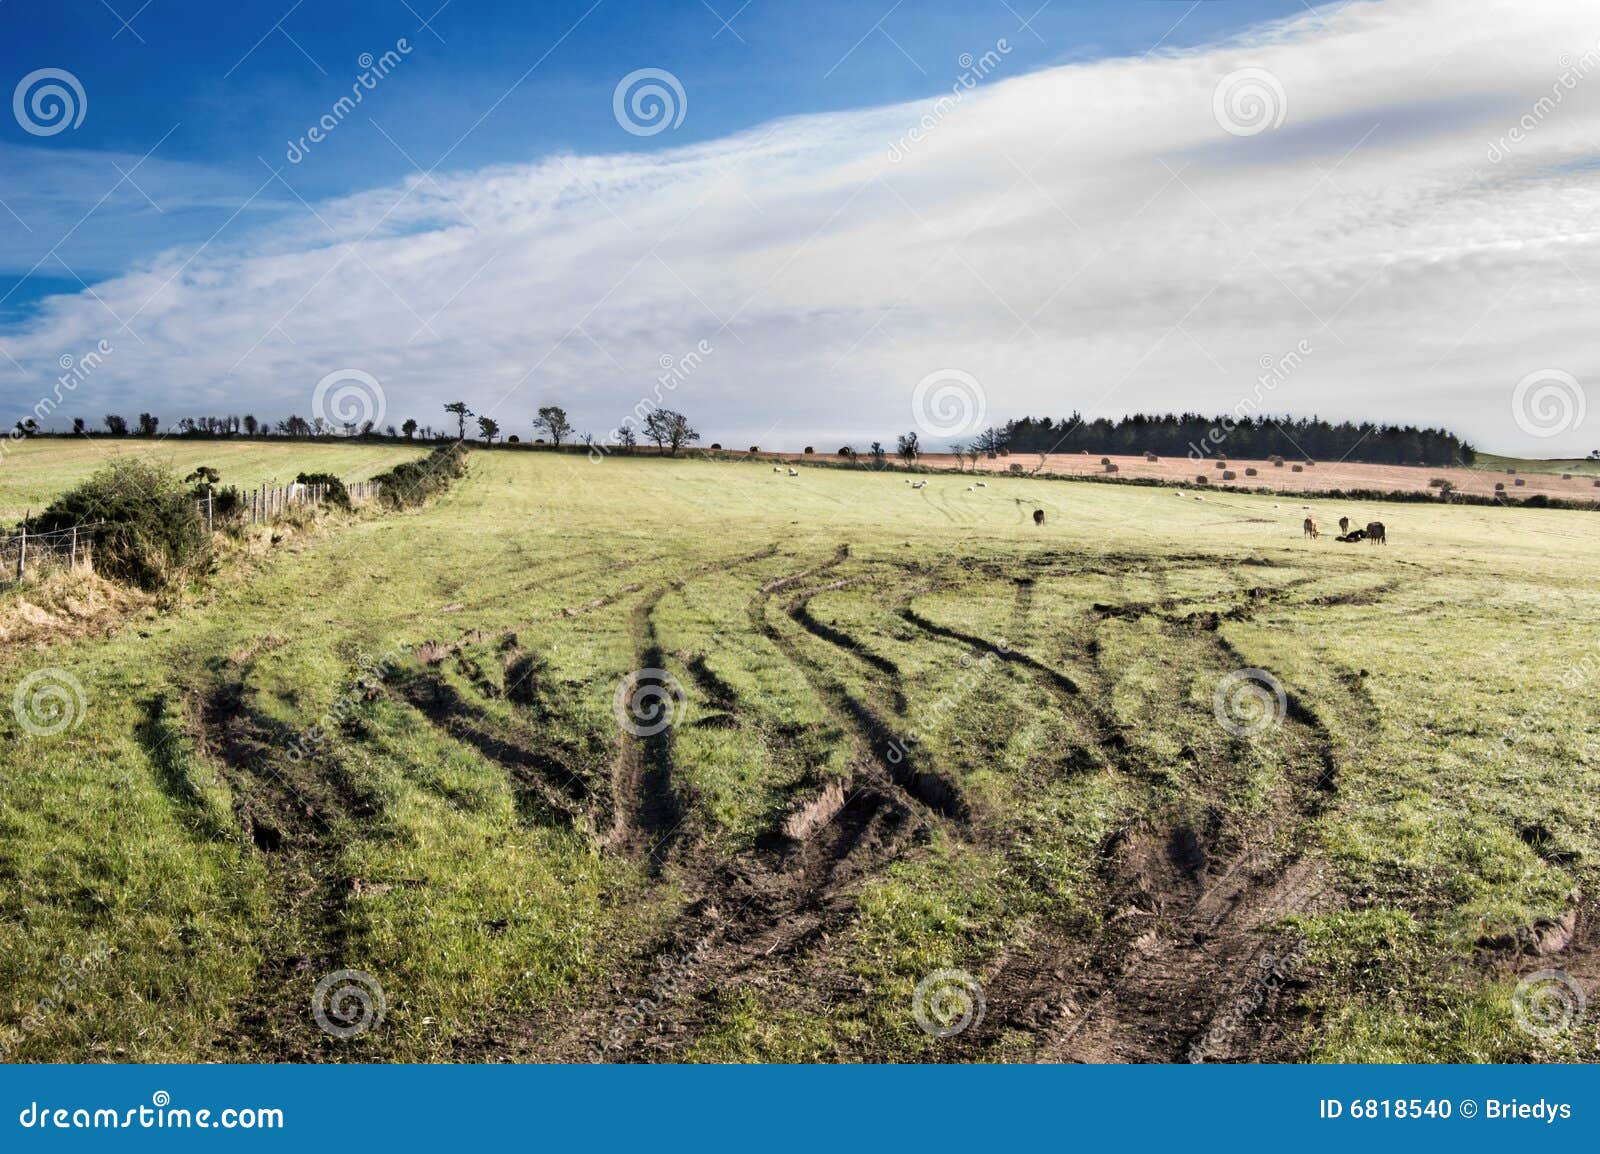 tire tracks in agricultural field